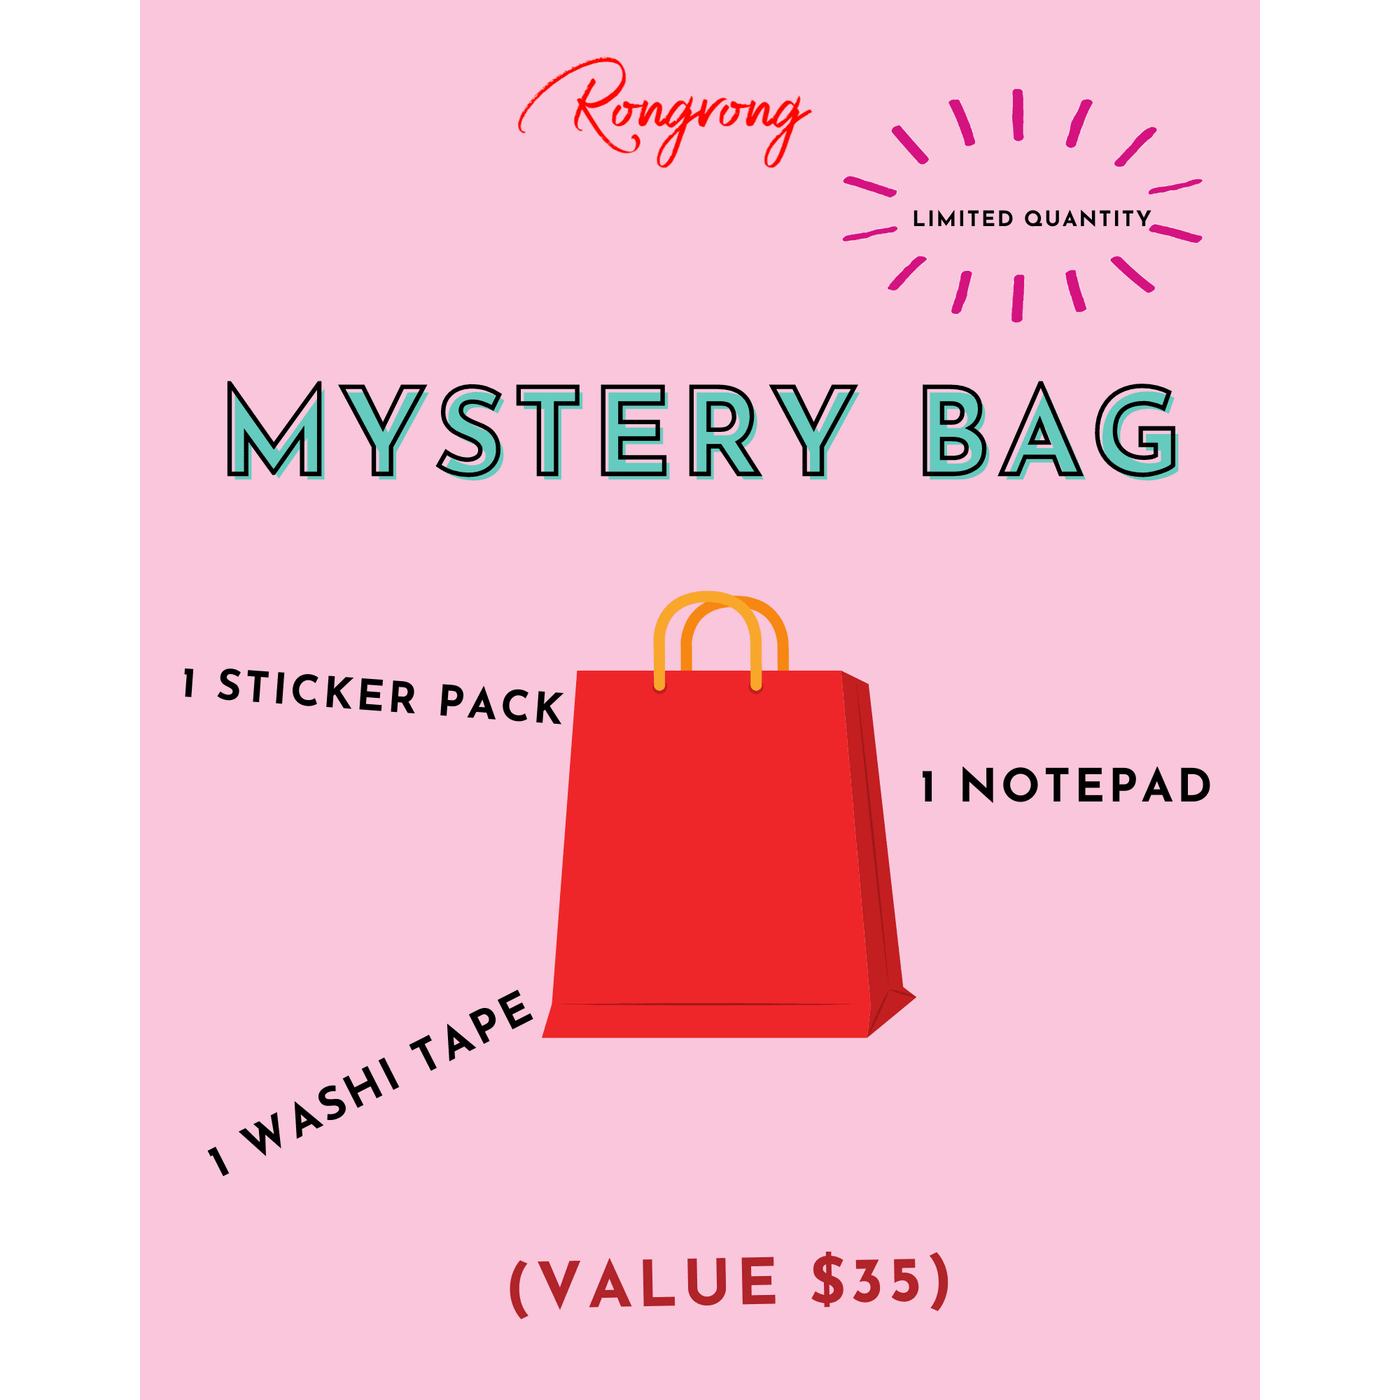 MYSTERY BAG by Rongrong DeVoe